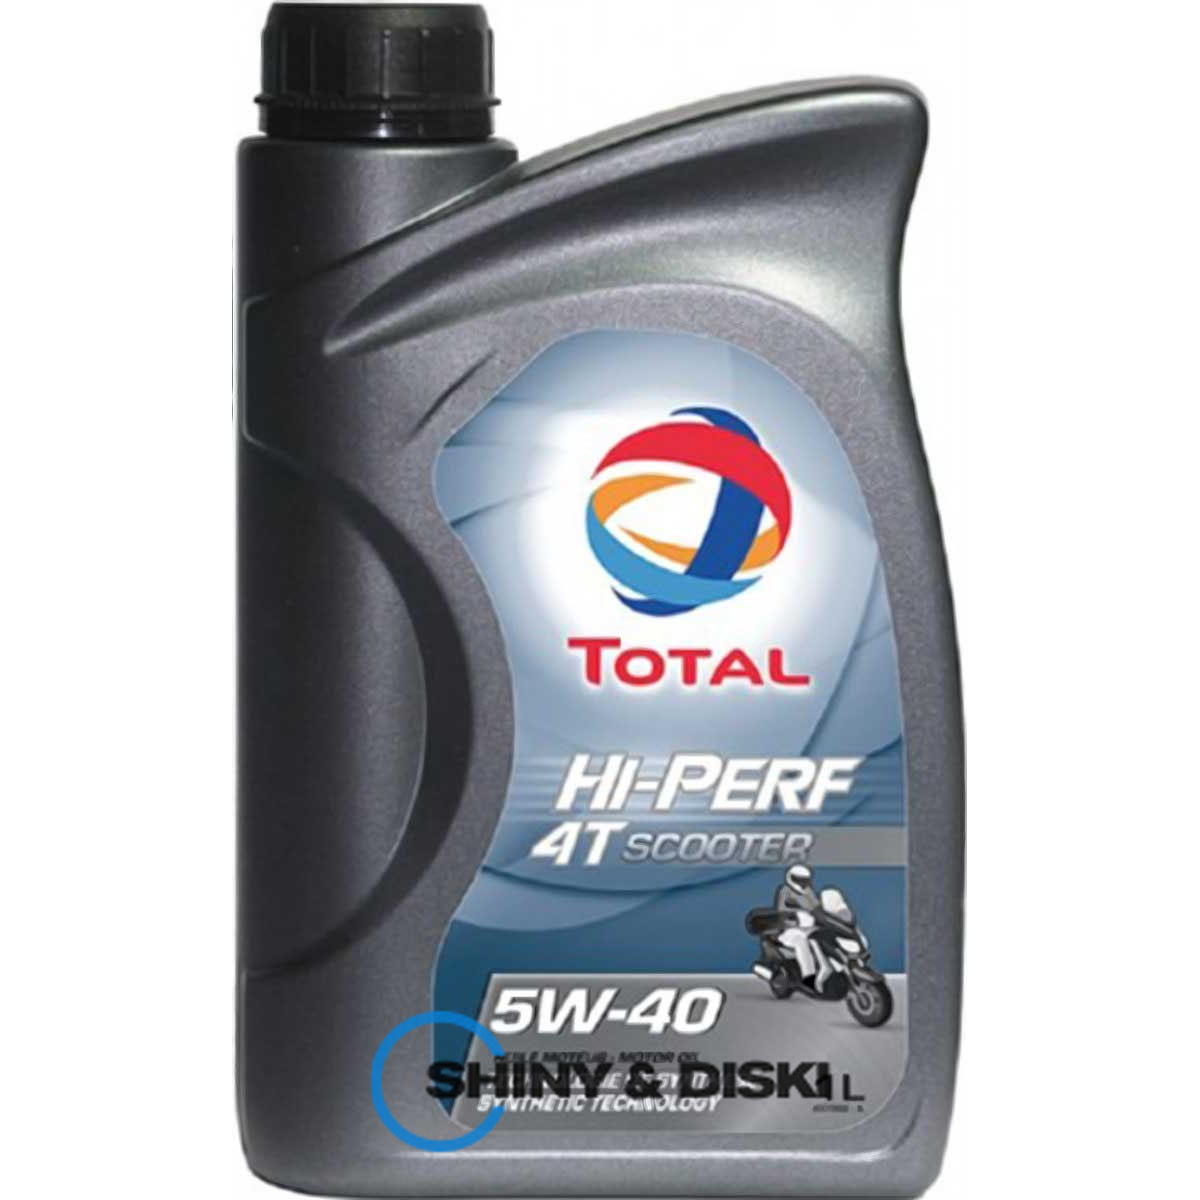 total hi-perf 4t scooter 5w-40 (1л)